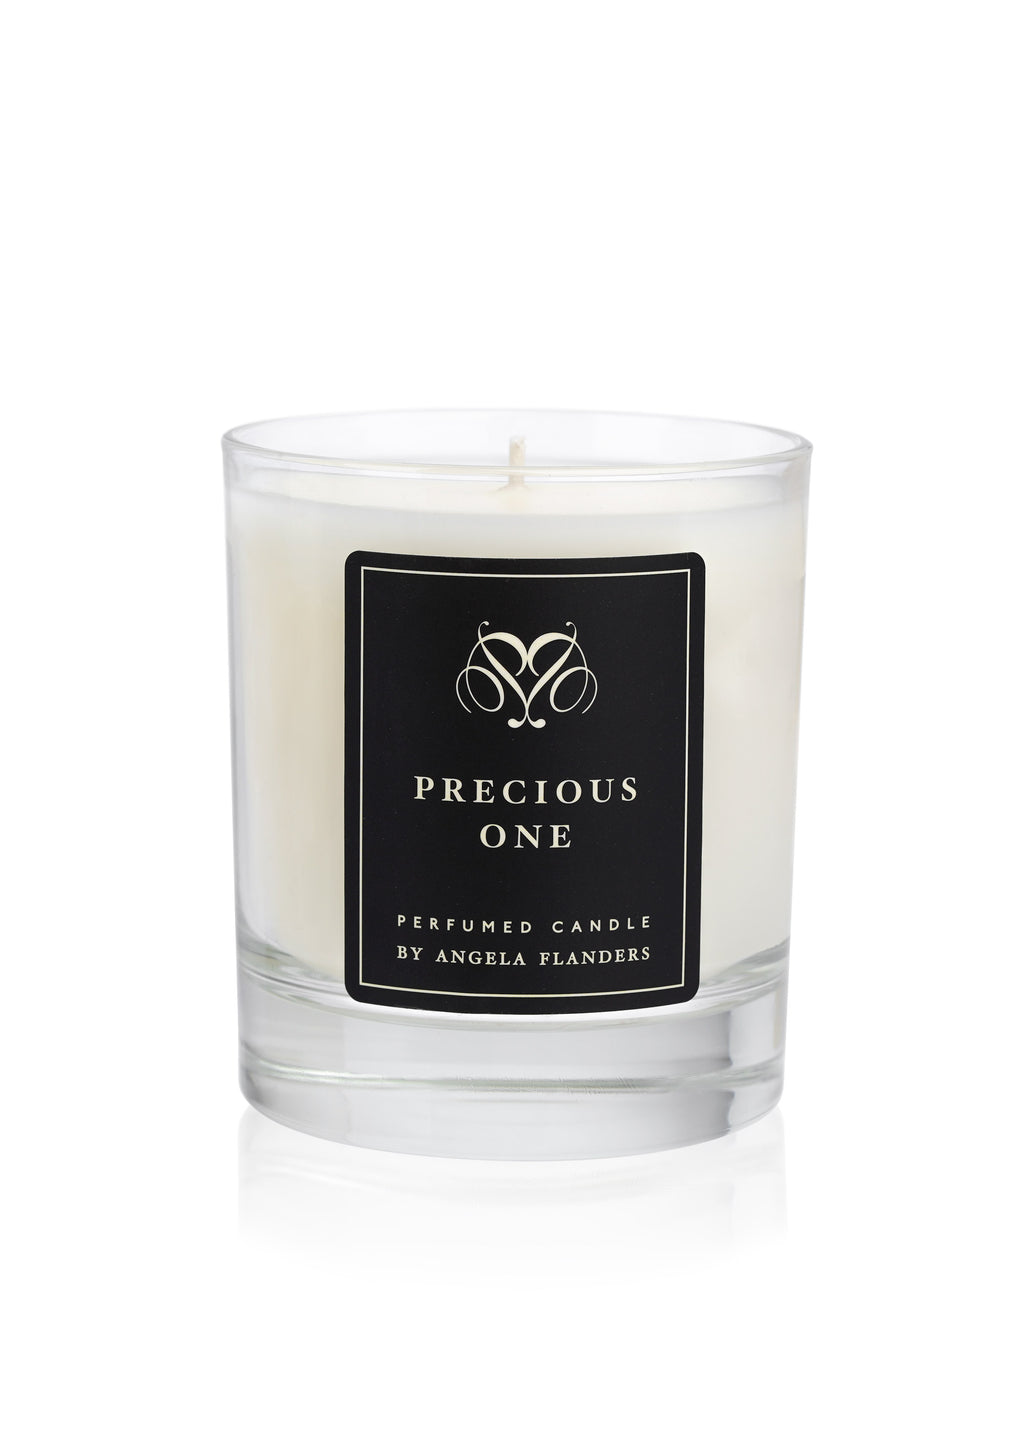 Precious One Perfumed Candle